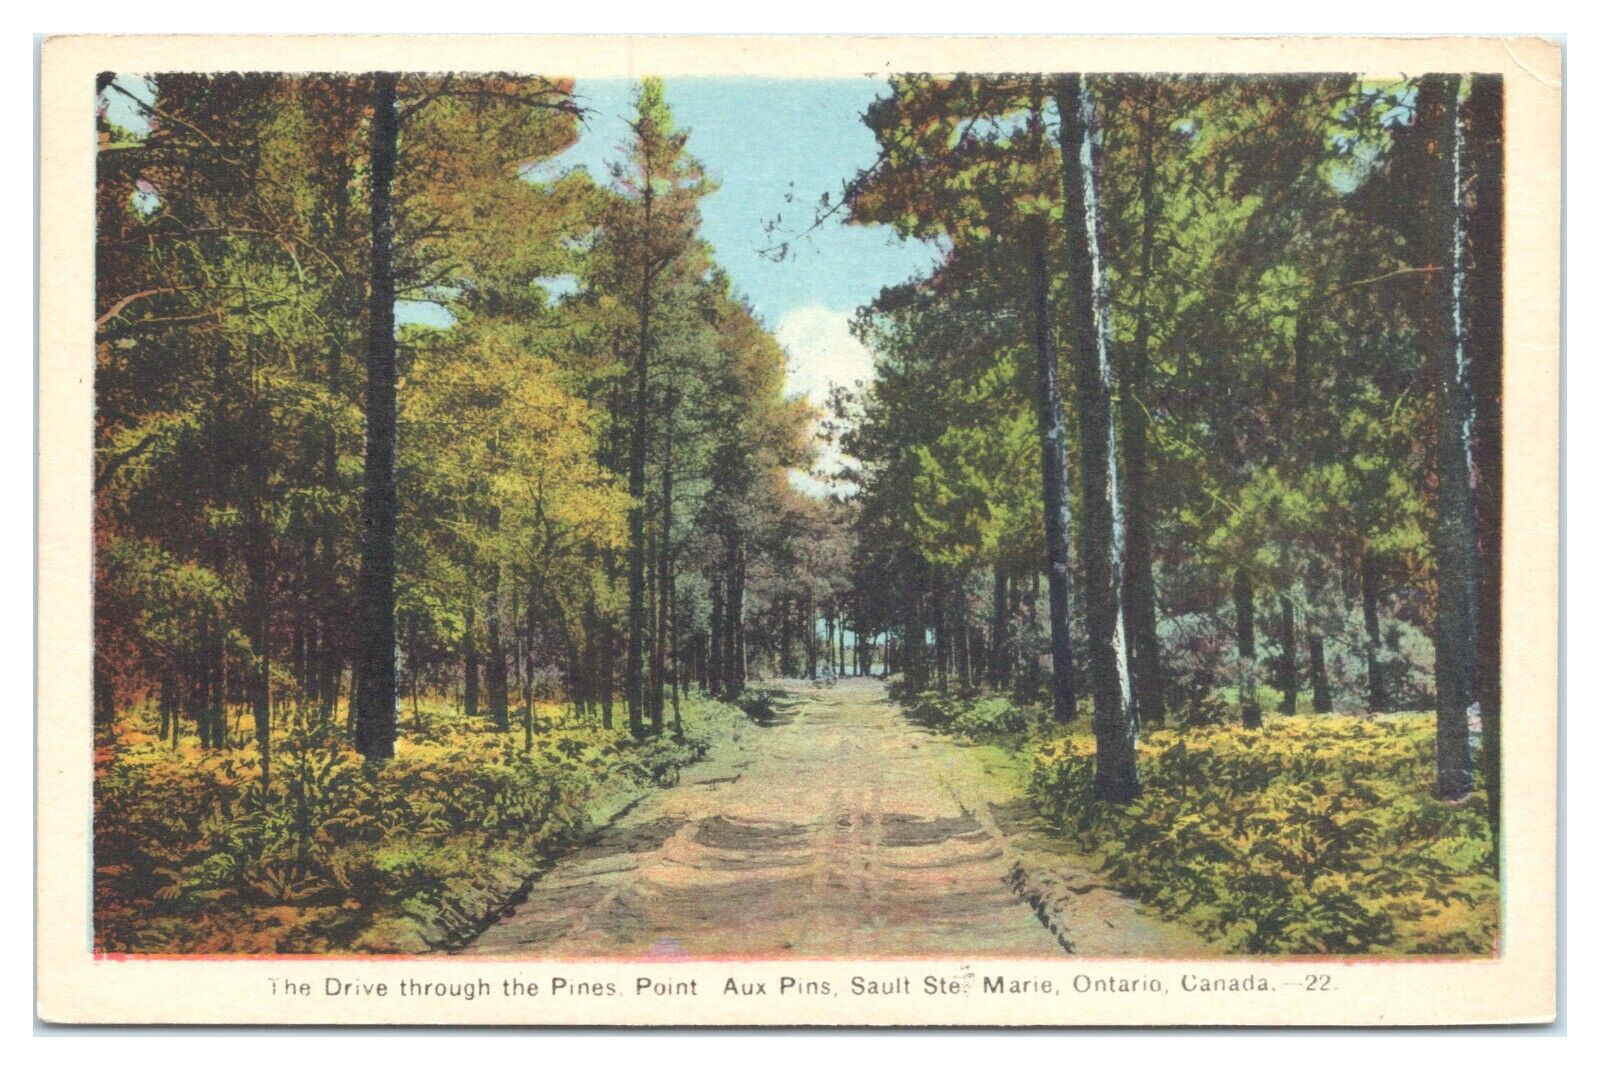 The Drive Through The Pines, Point Aux Pins, Sault Ste. Marie, Ontario, Canada